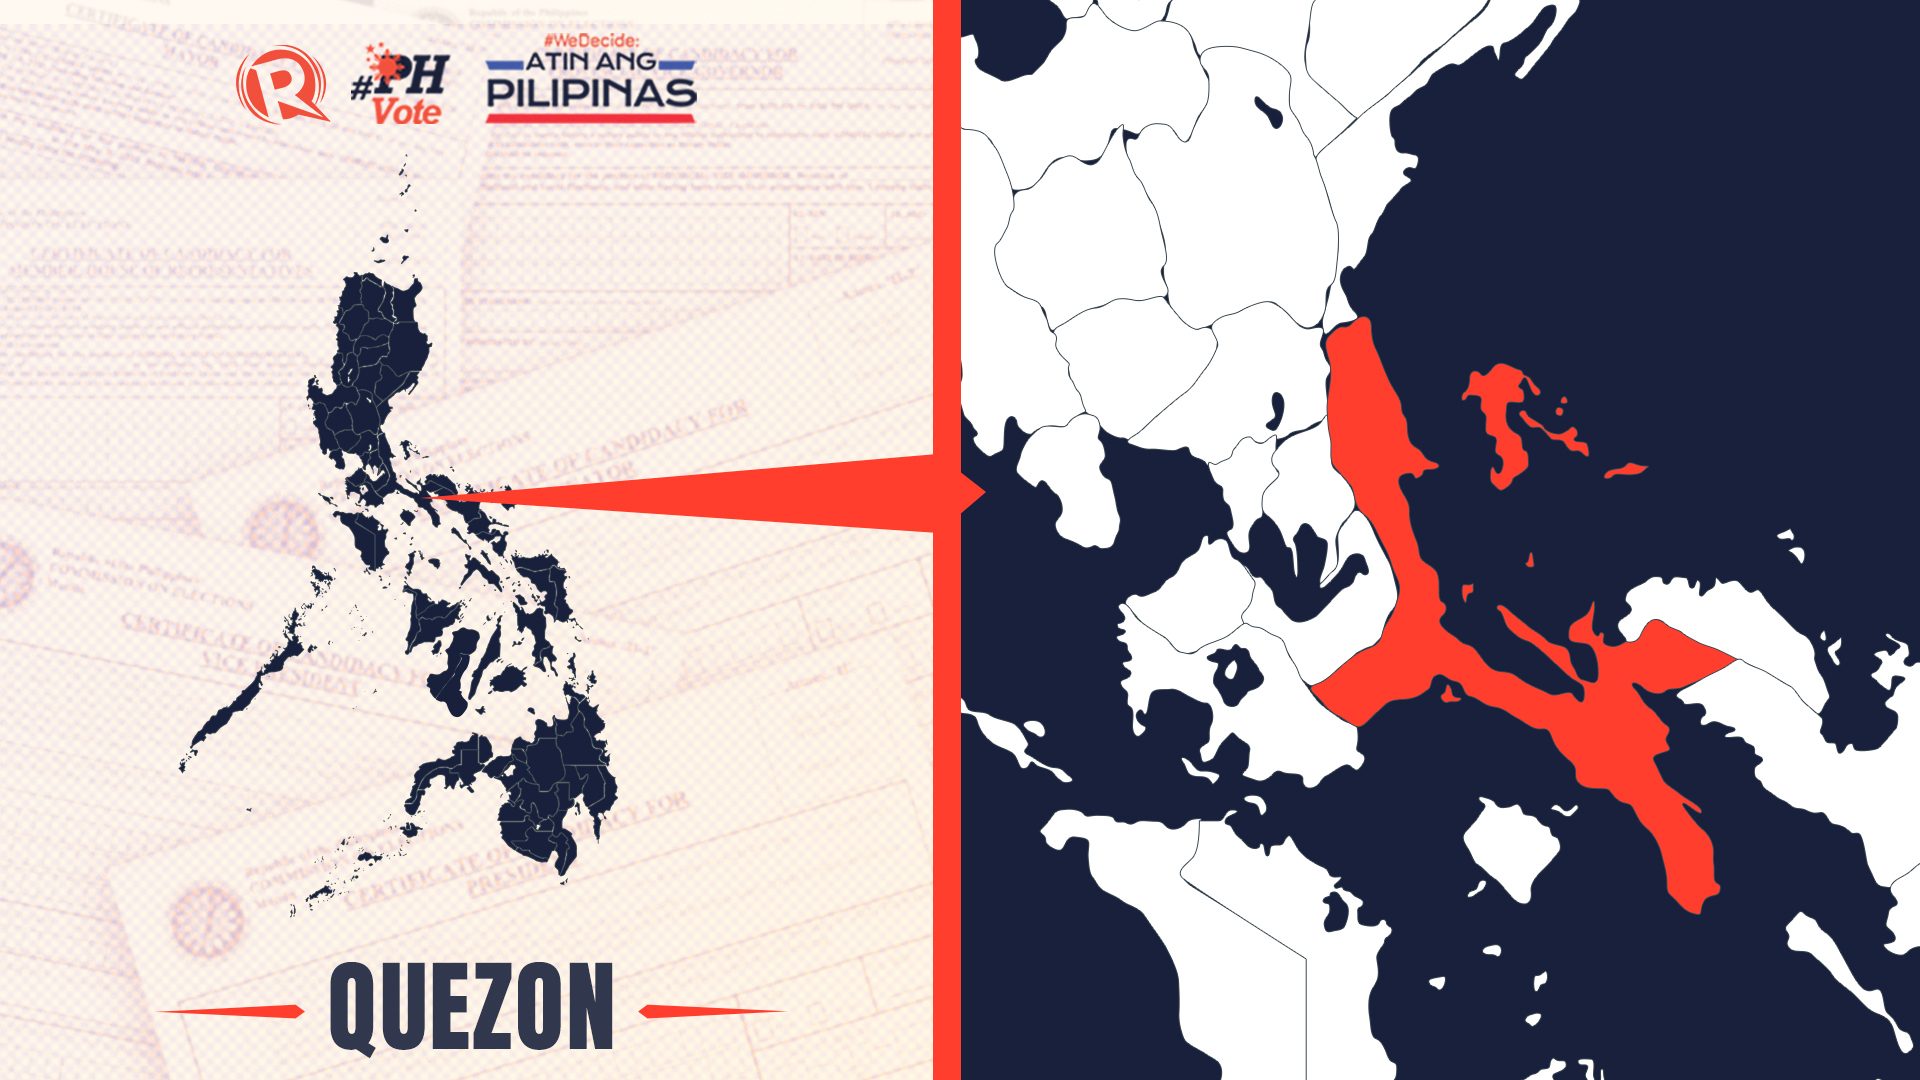 List who is running in quezon in the philippine elections